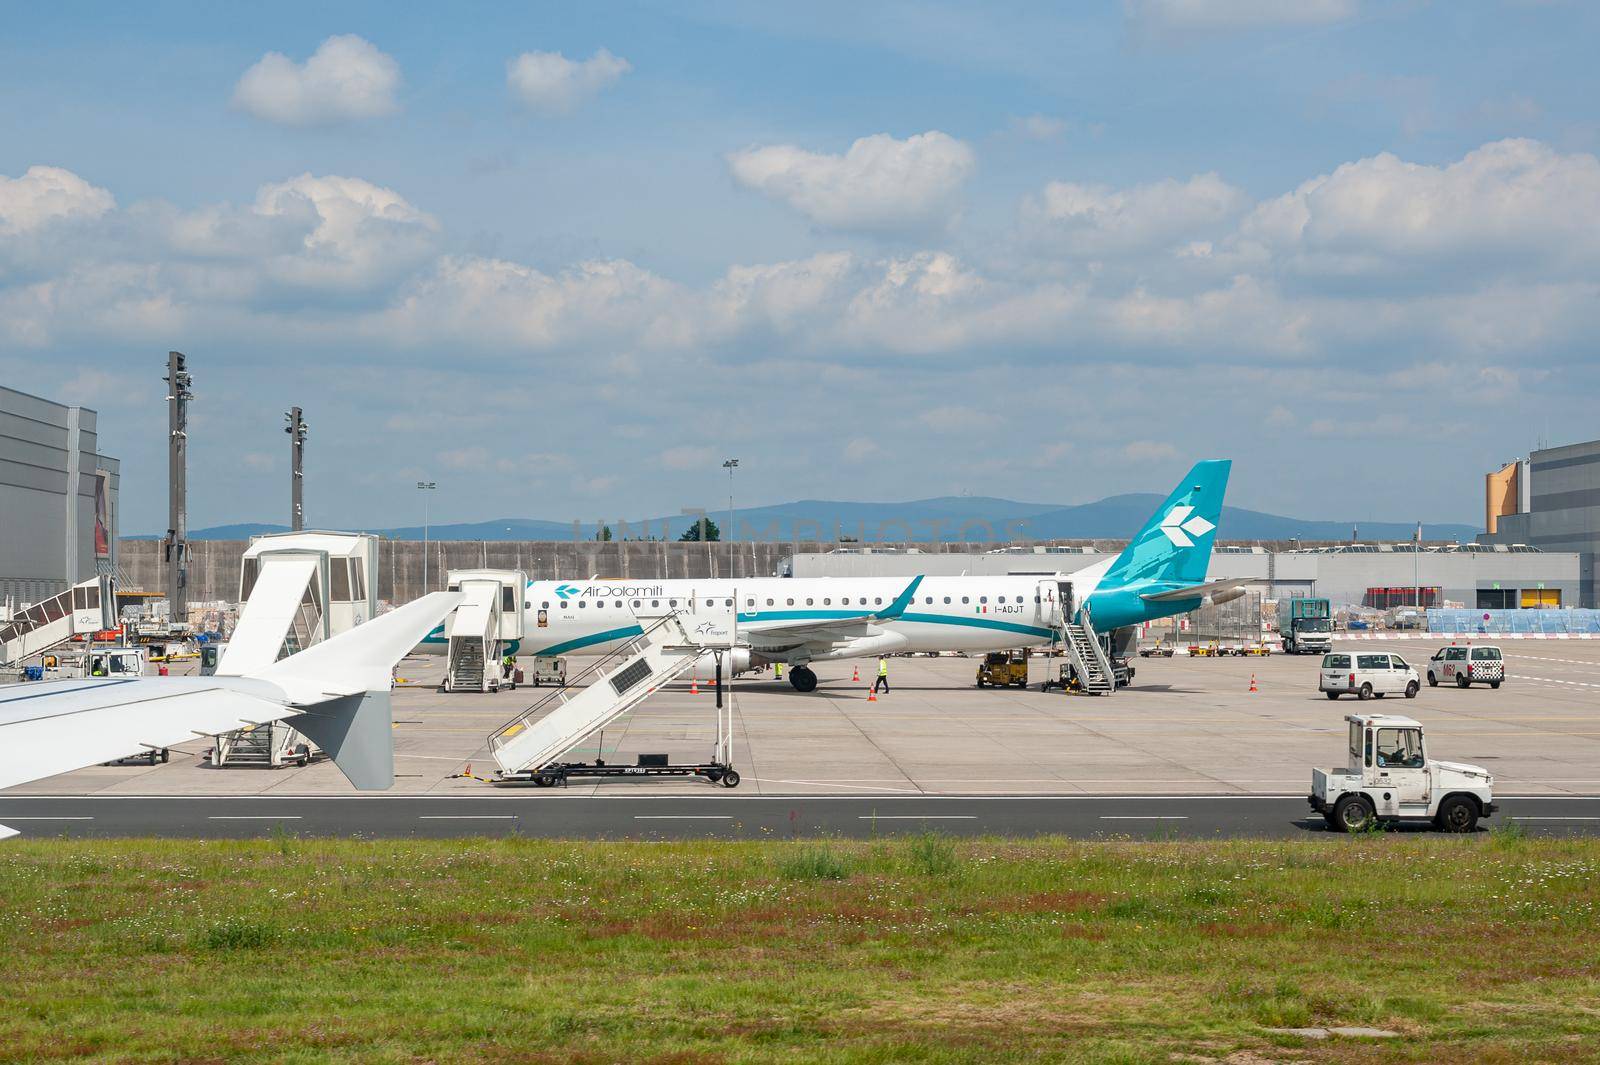 05/26/2019 Frankfurt Airport, Germany. Air Dolomiti, the Italian airline part of the Lufthansa Group. Airport operated by Fraport and serves as the main hub for Lufthansa including Lufthansa CityLine and Lufthansa Cargo.